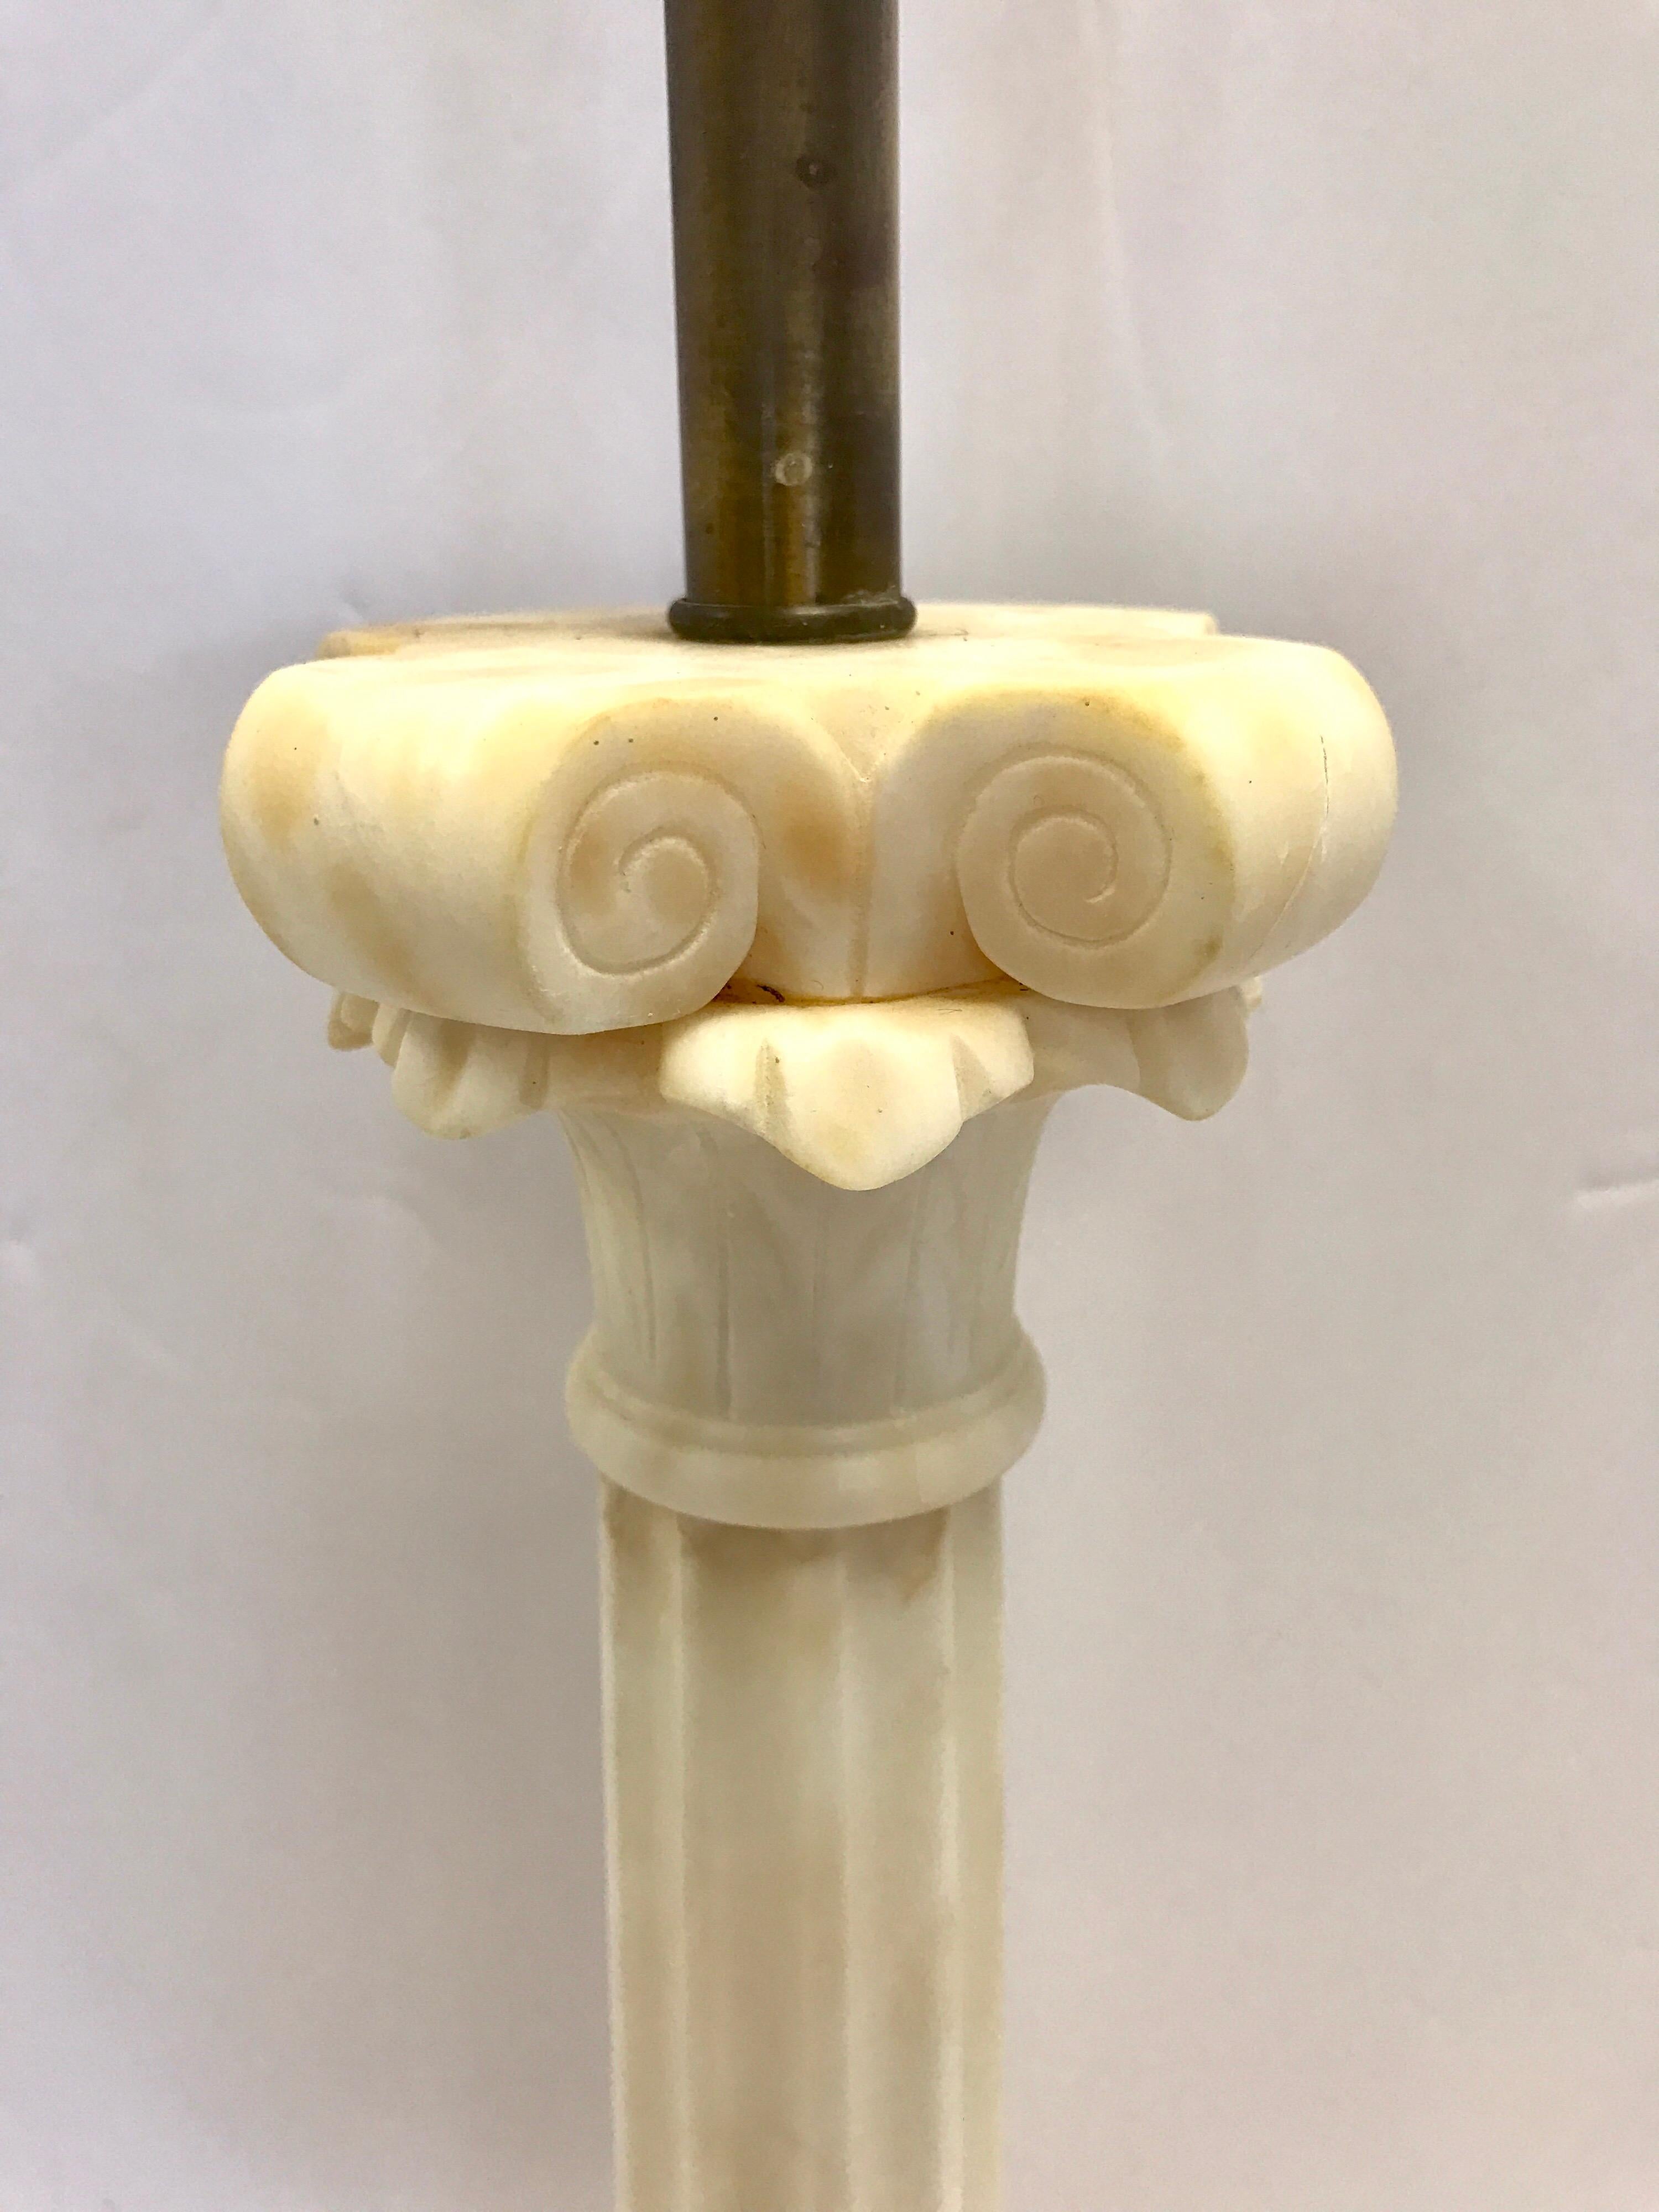 Tall alabaster column table lamp with alabaster finial. Made in Italy. 29 inches to top of socket. Wired for US and in working condition.